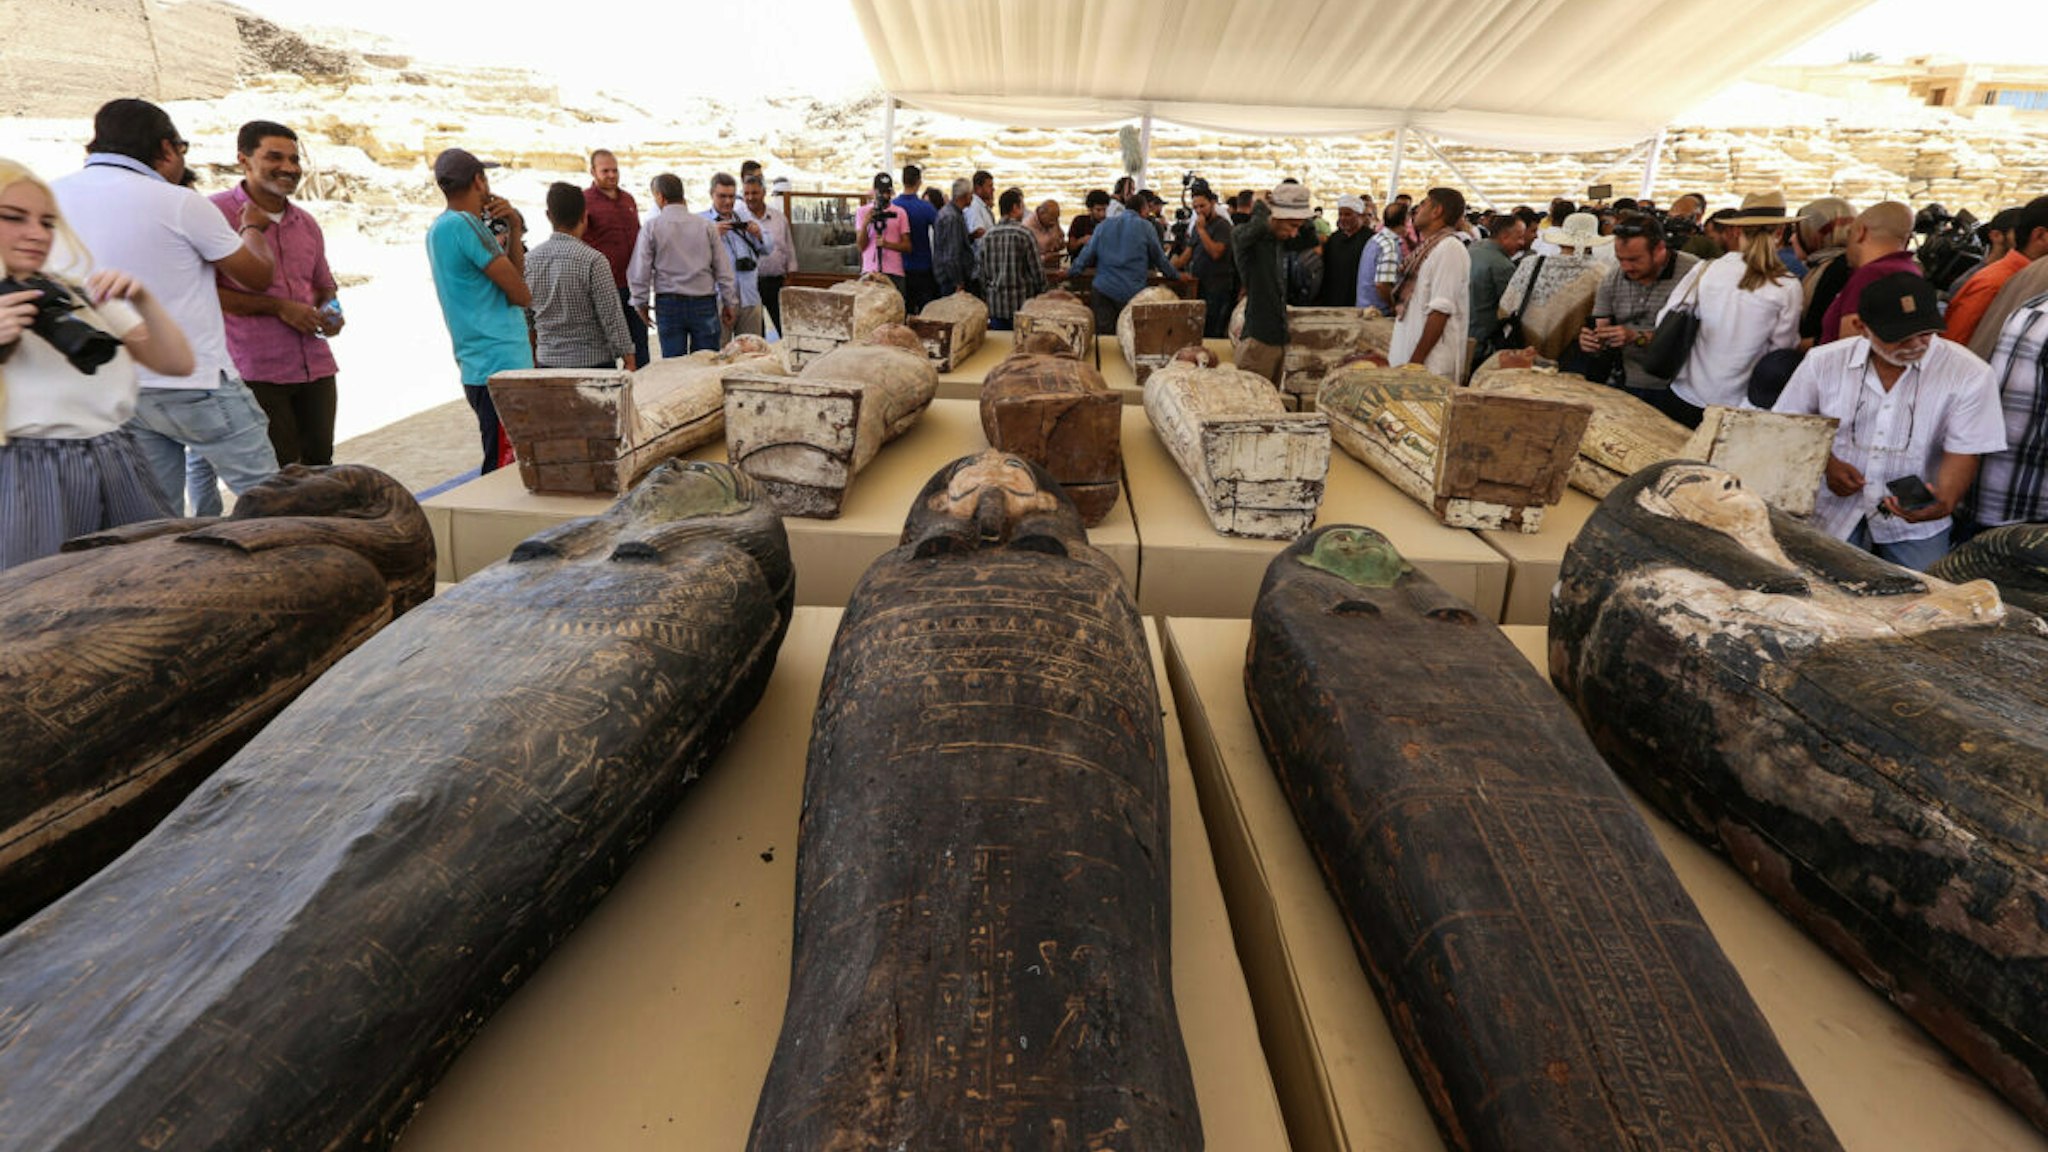 The discovery of mummy coffins dating back more than 2,500 years, which were revealed in the ancient Saqqara ring, during an official conference attended by Mustafa Al-Waziri, Secretary-General of the Supreme Council of Egyptian Antiquities, in an area on May 30, 2022 Giza Egypt